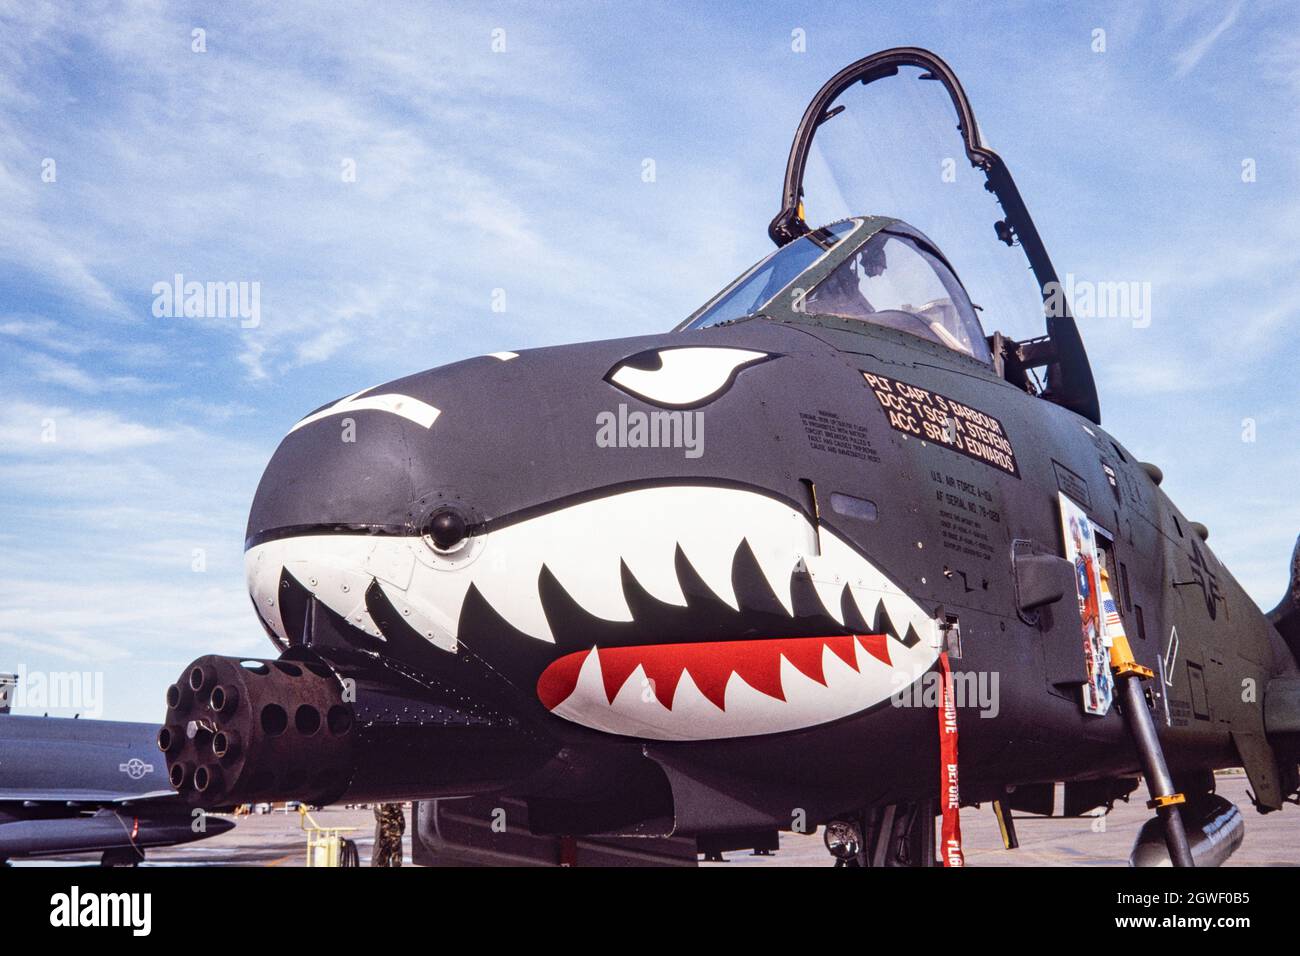 Front view of a Fairchild Republic A-10 Thunderbolt II at Holloman AFB, showing the 30mm GAU rotary cannon in the nose. Stock Photo